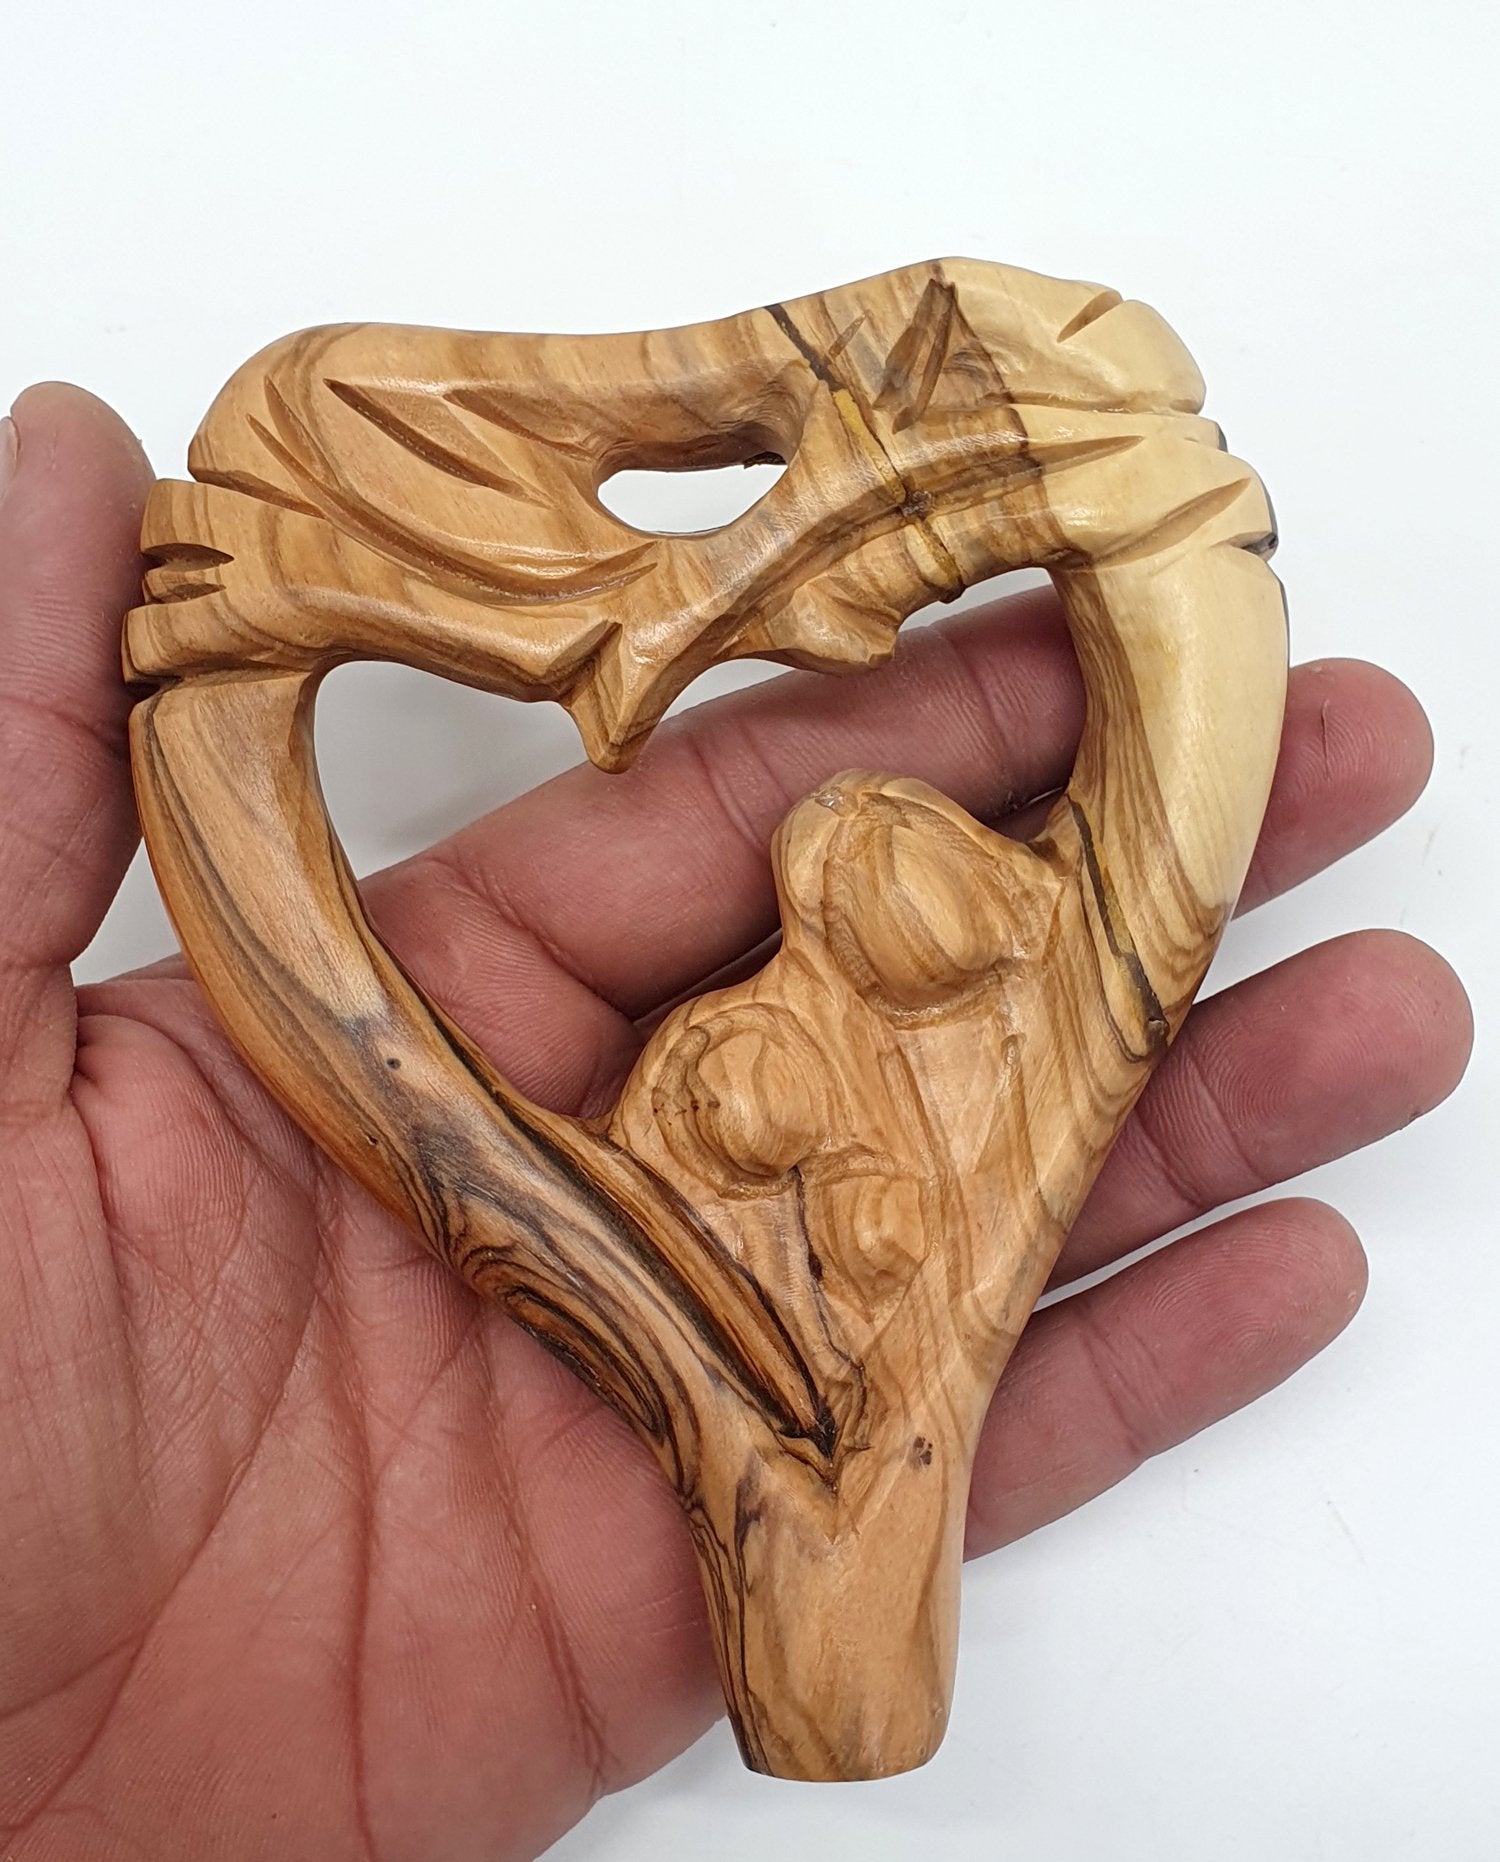 Heart Shaped Olive Wood Holy Family Statue - Small Catholic Figurine of Joseph, Mother & Child, Bethlehem Table Sculpture - Zuluf